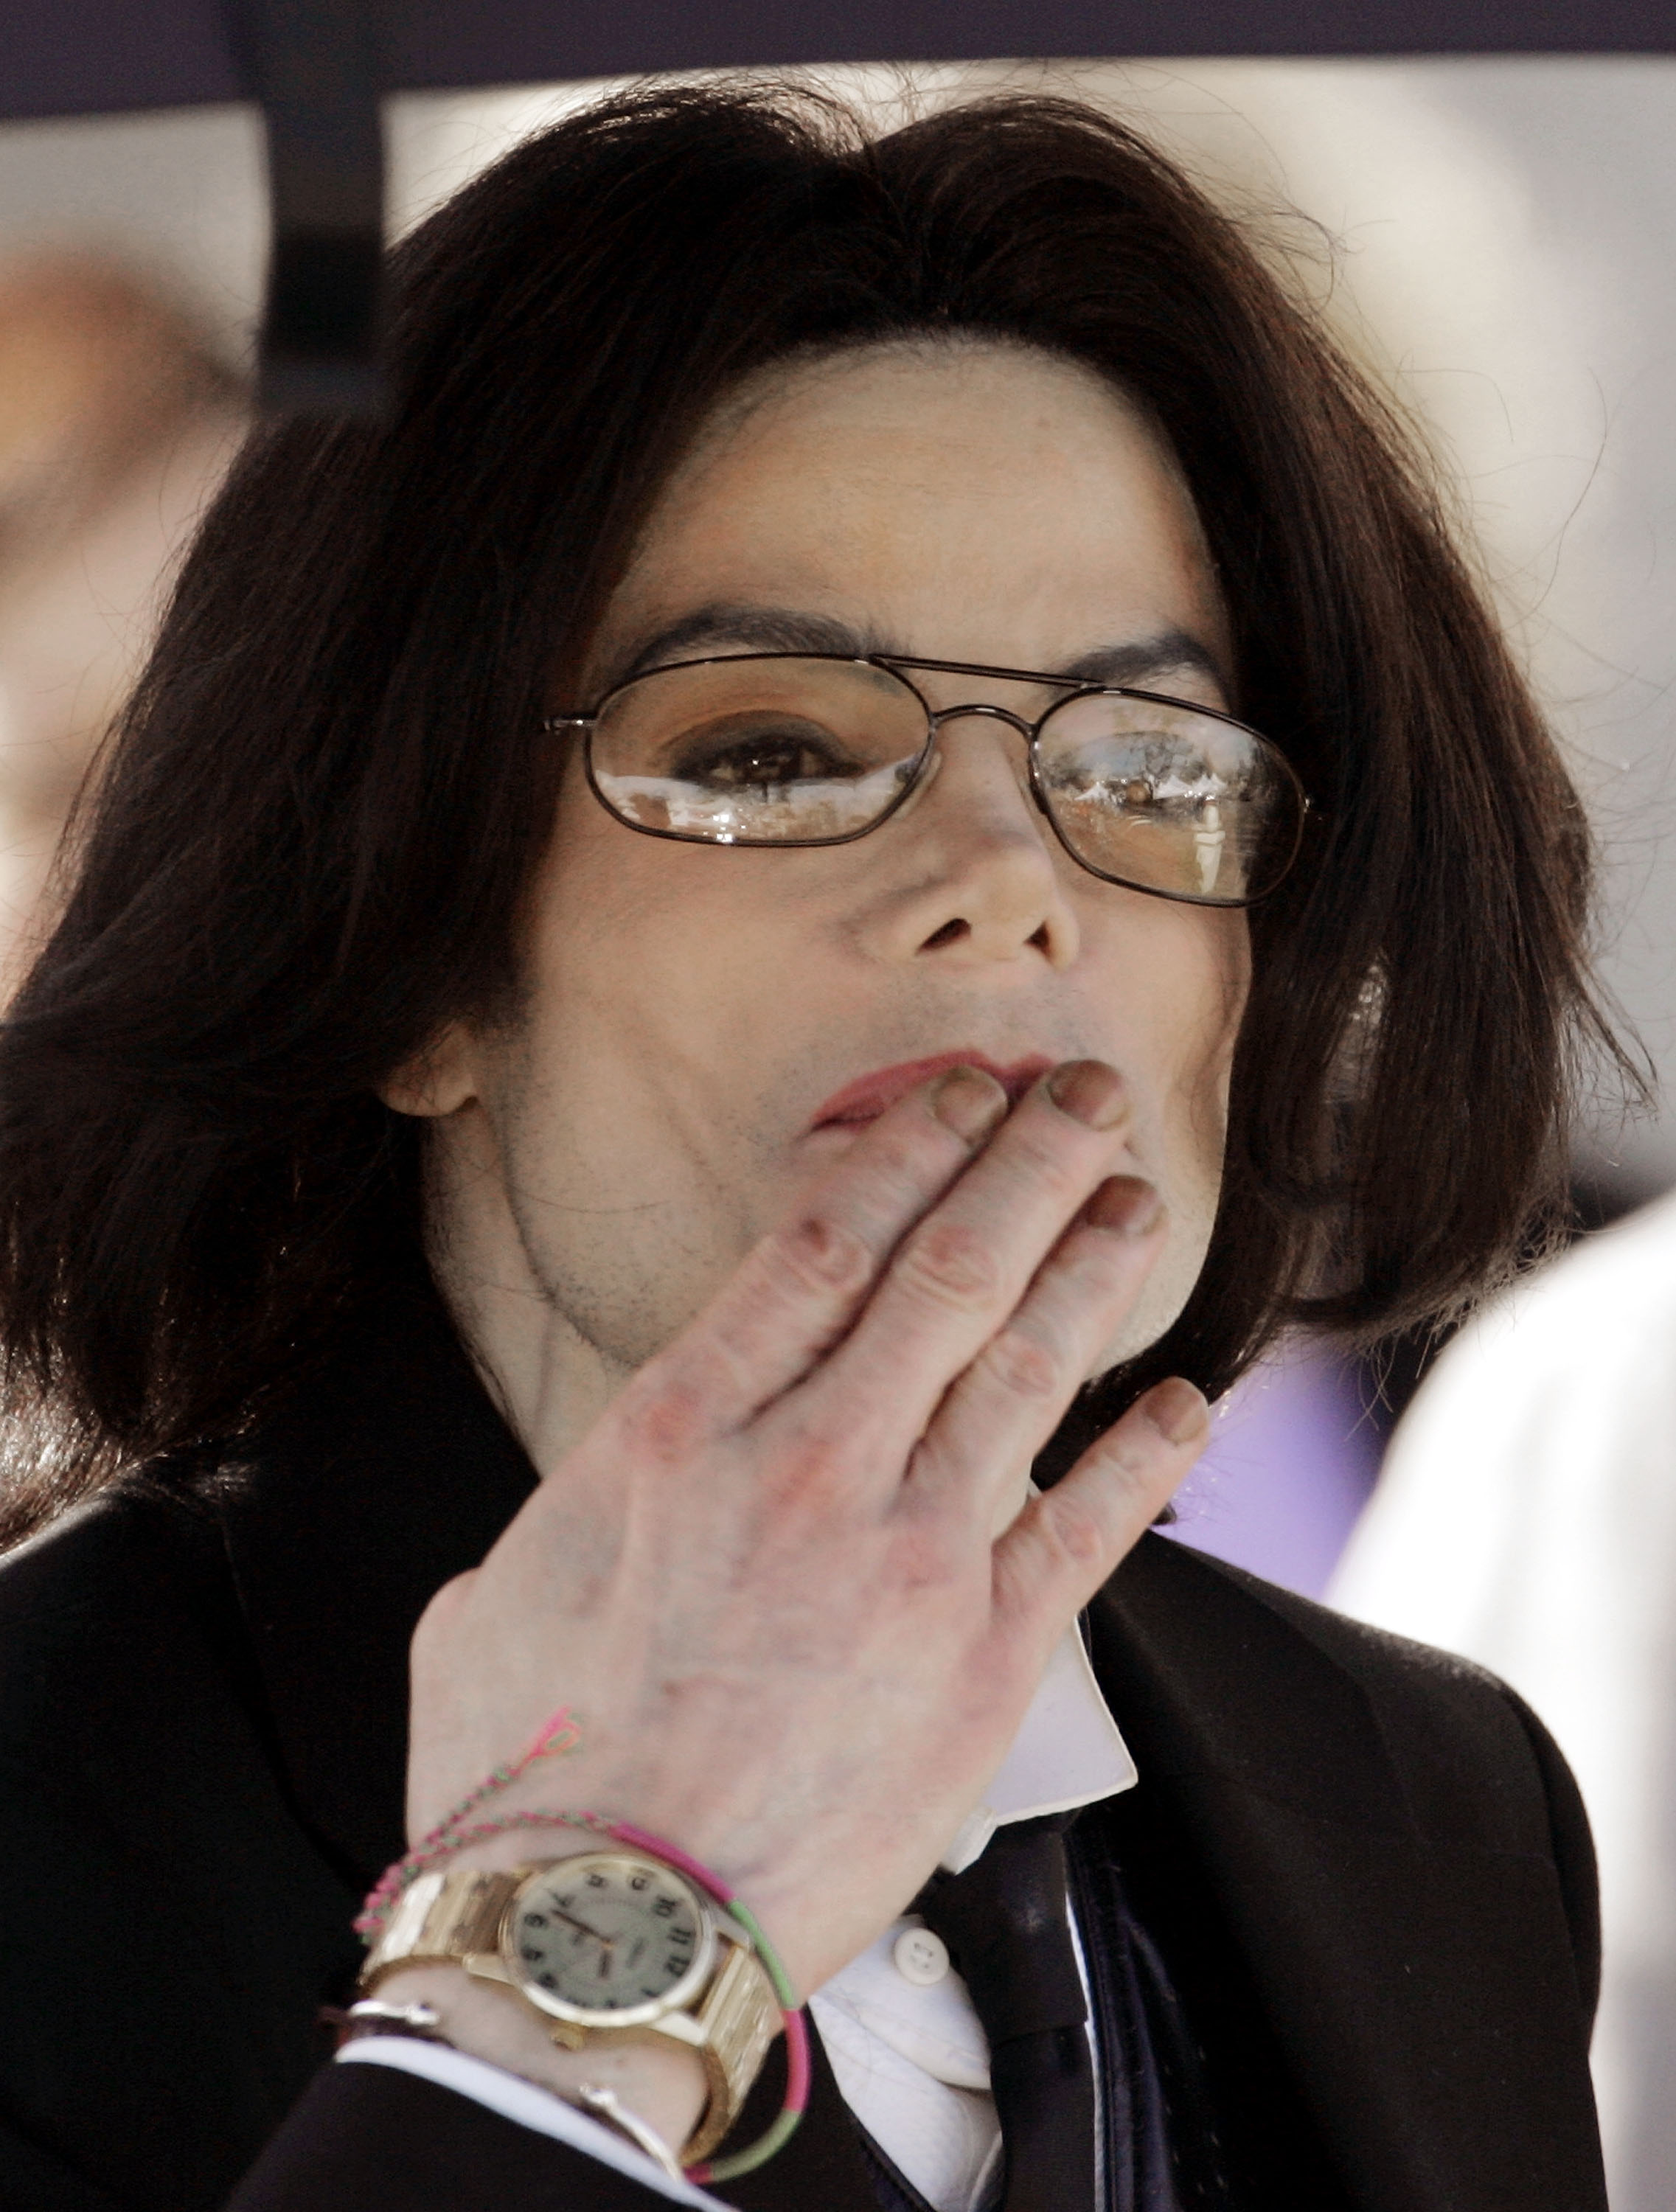 Michael Jackson leaving a courthouse in Santa Maria, 2005 | Source: Getty Images